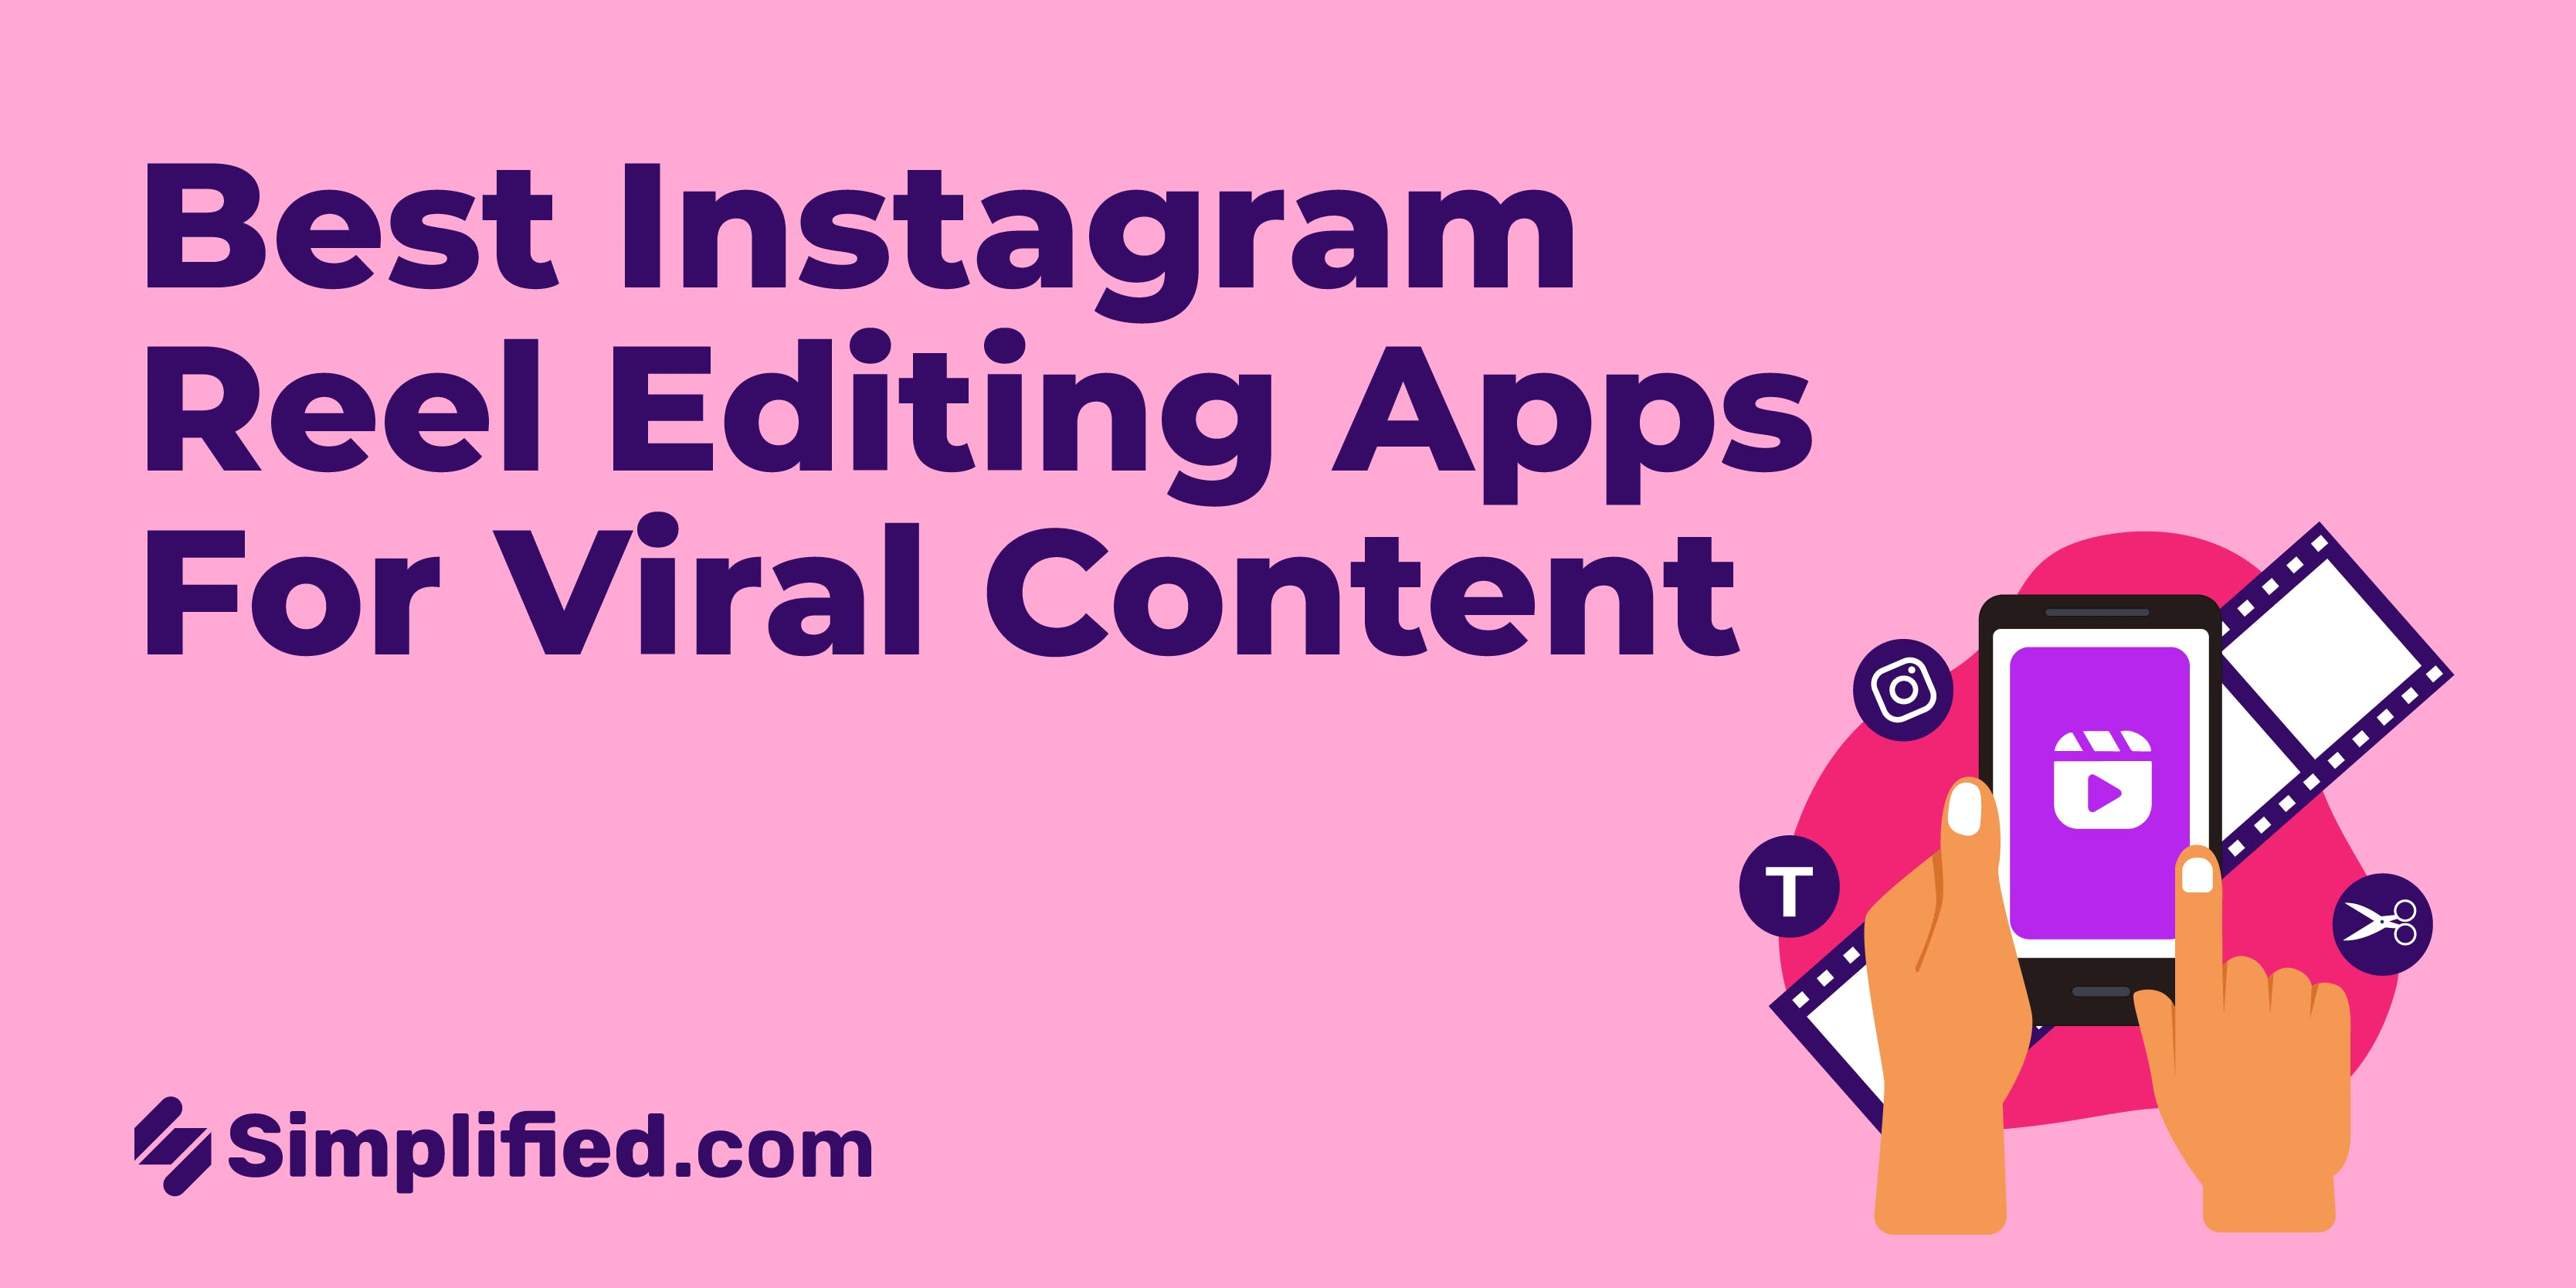 Enhance Your Instagram Reels with These 7 Editing Apps